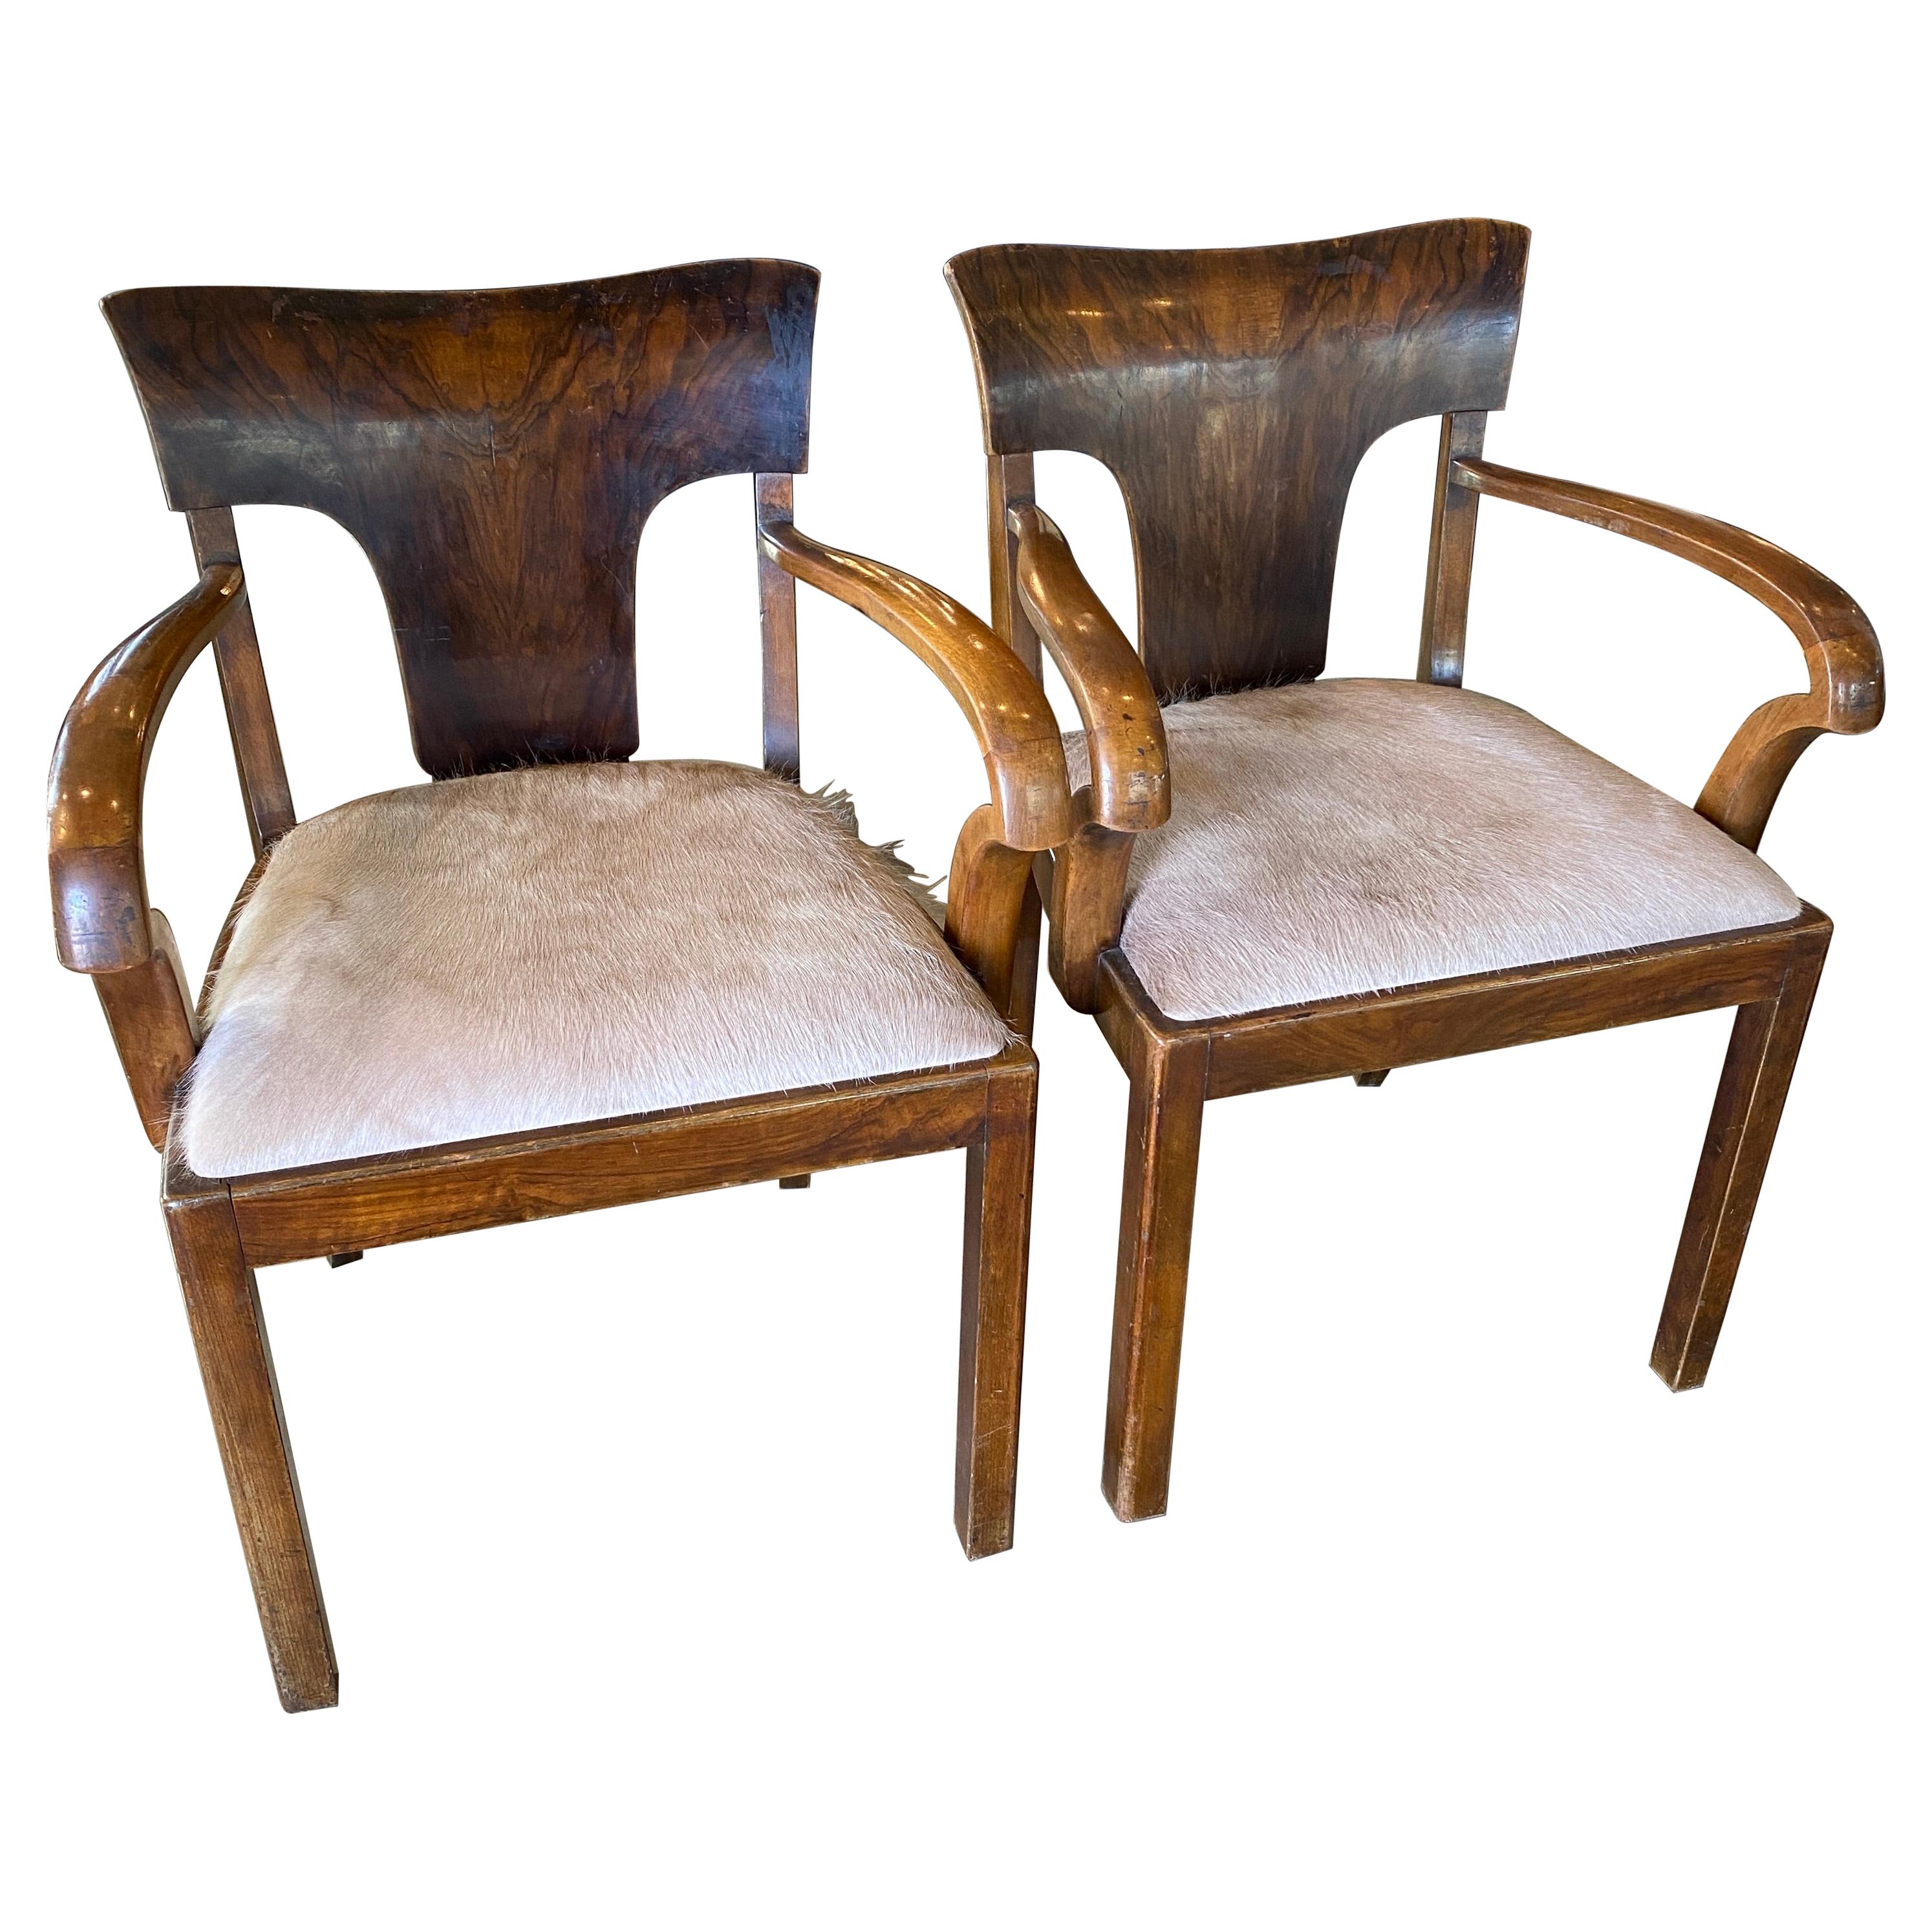 Pair of Art Deco Armchairs with Hide Seats